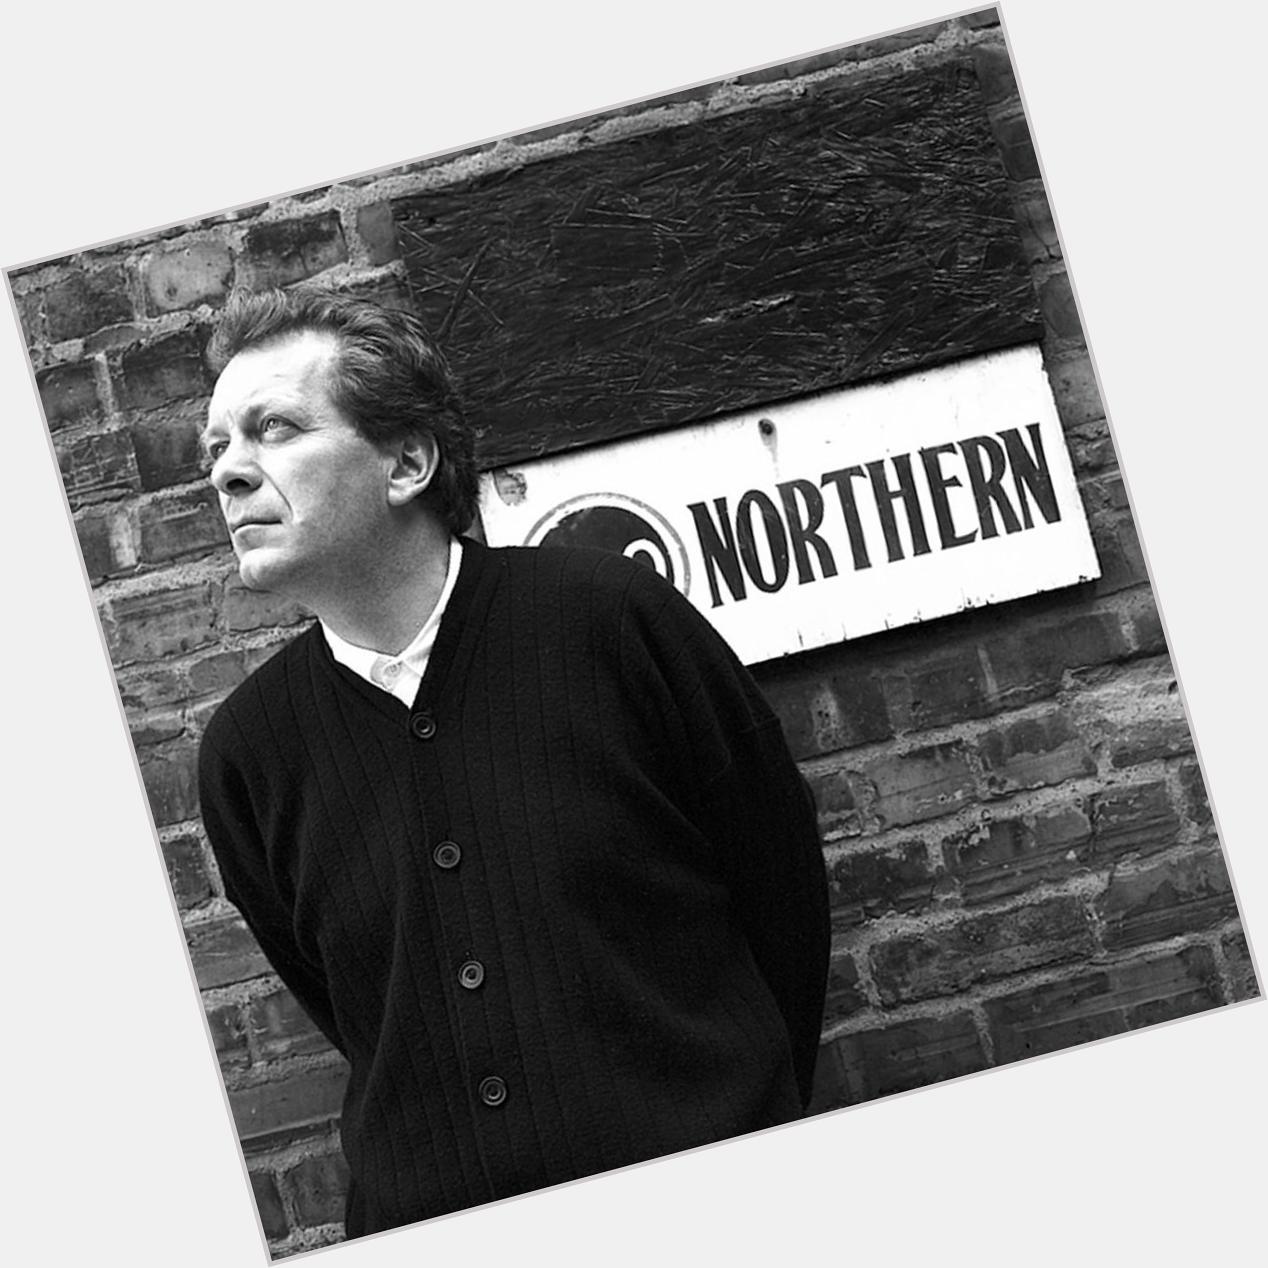 Tony Wilson would have been 65 today.
Happy Birthday to an utter legend! 